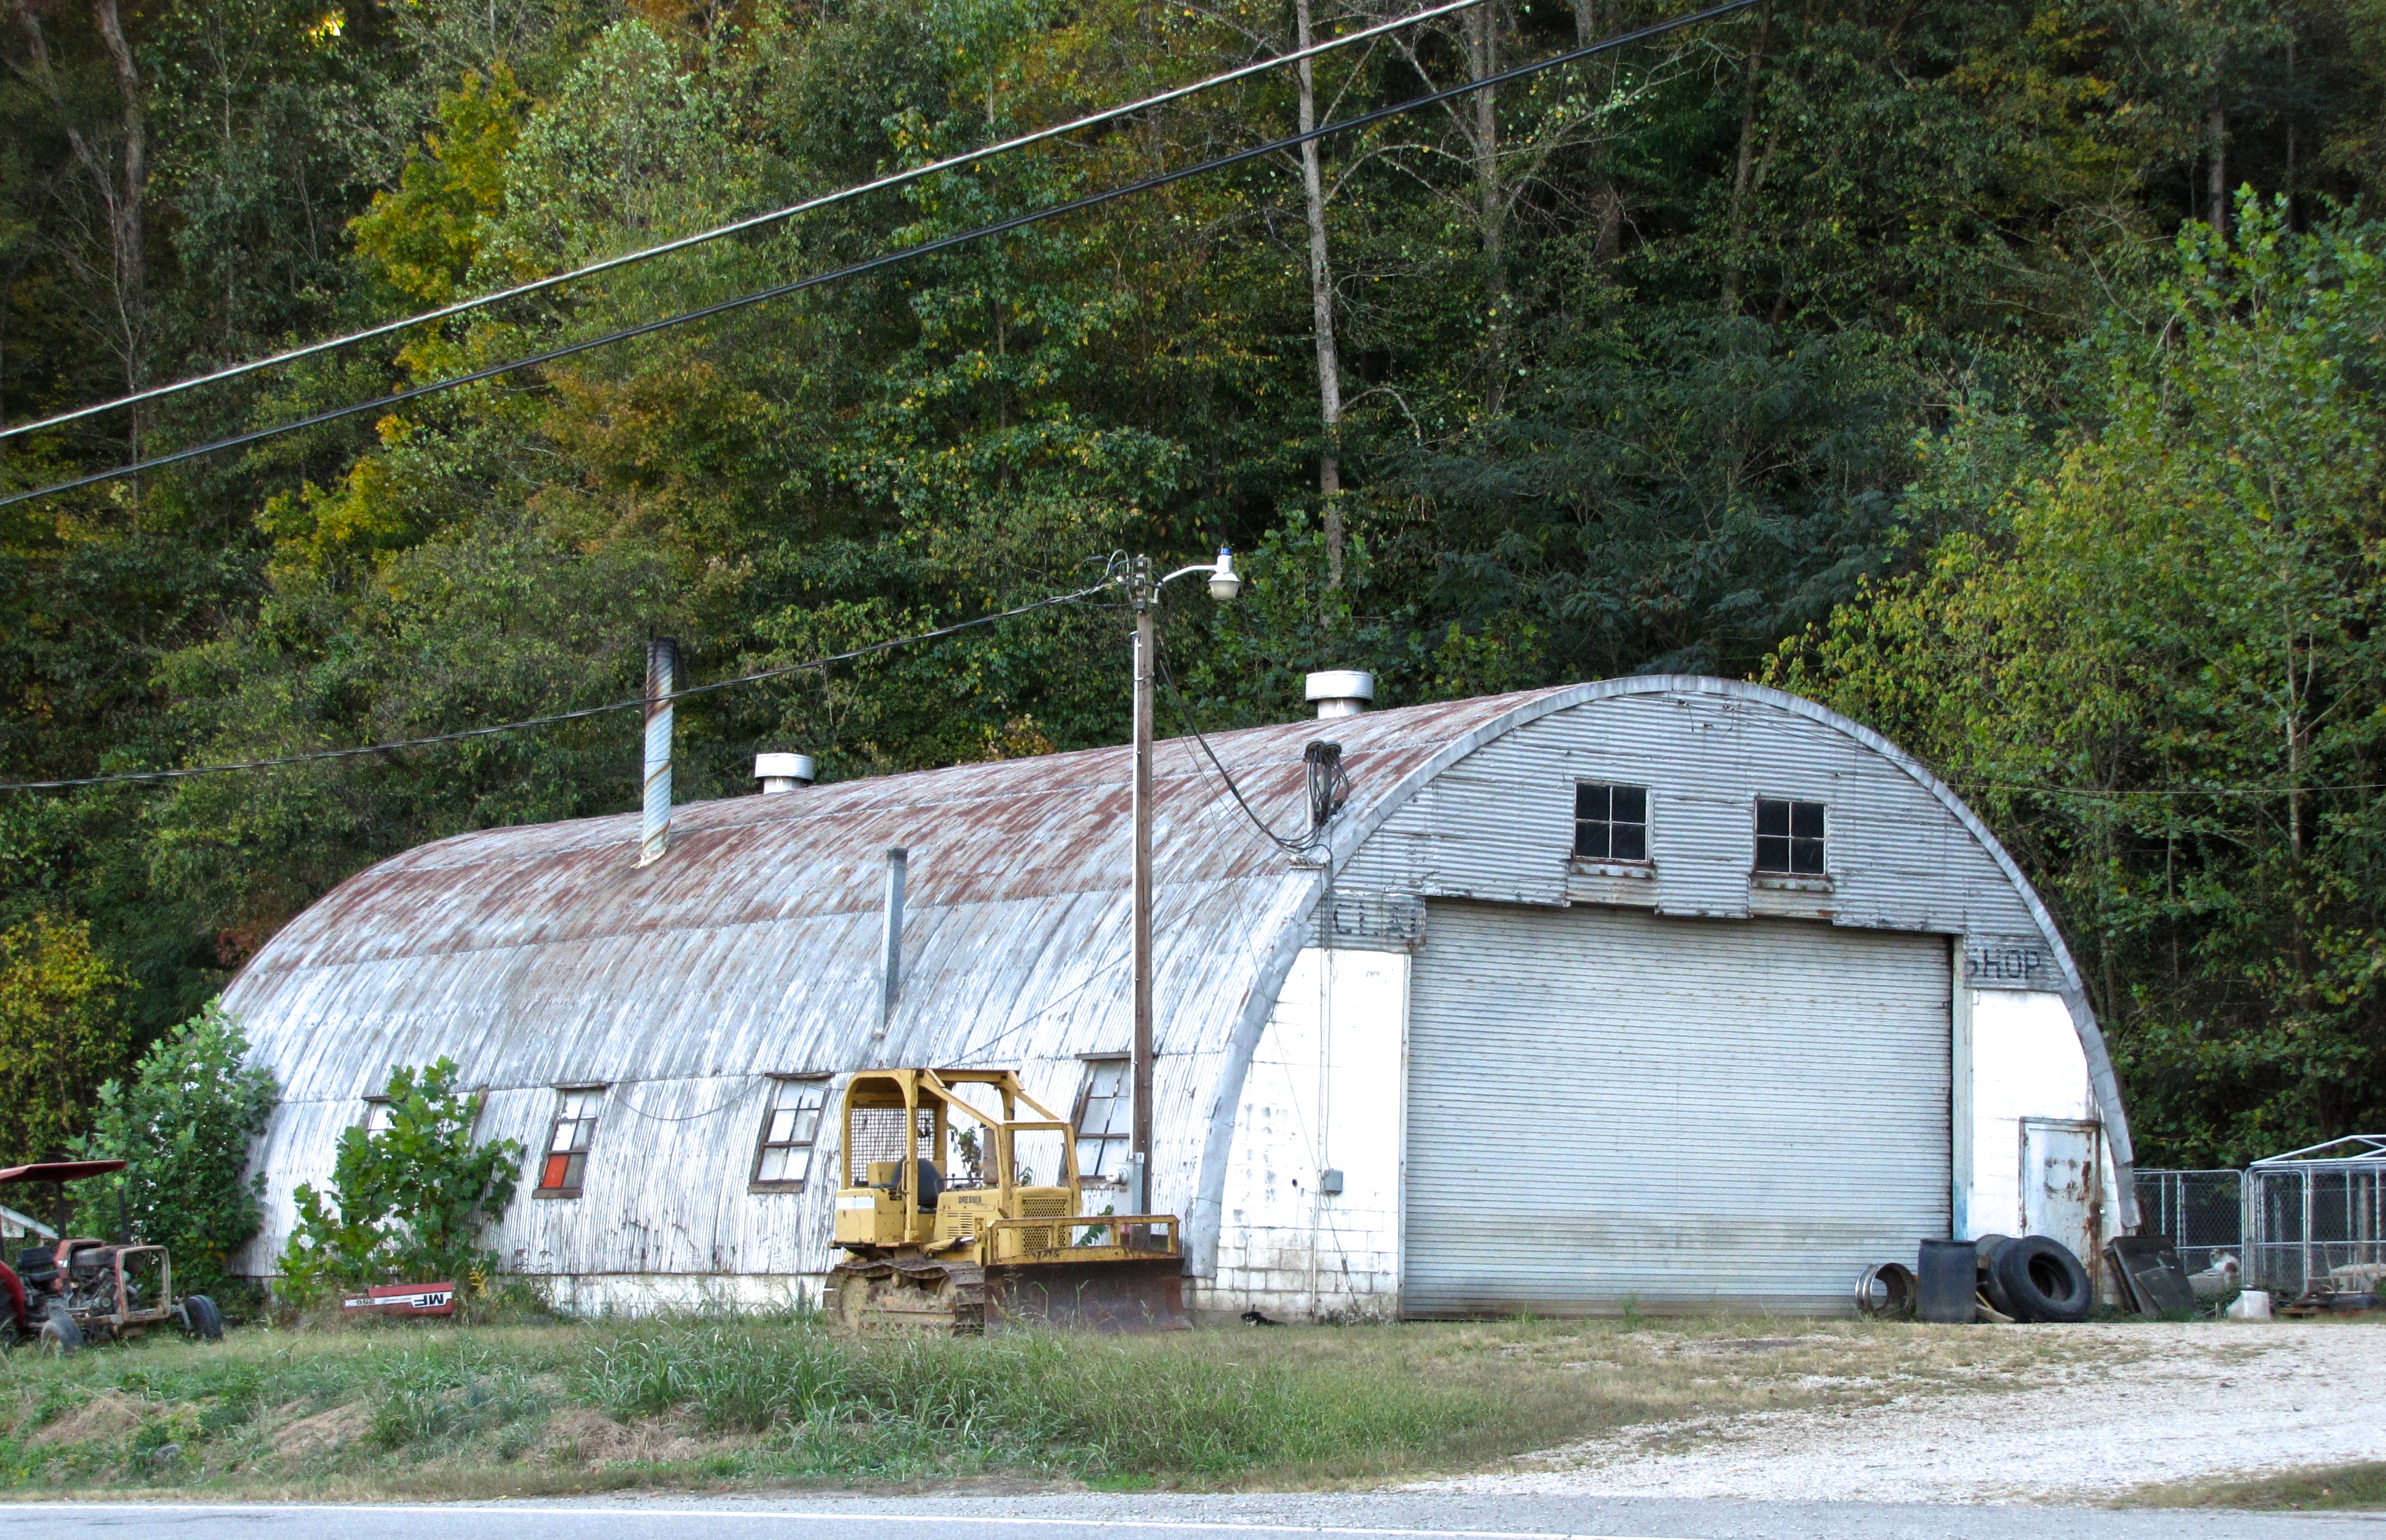 quonset hut in Natchitoches, LA